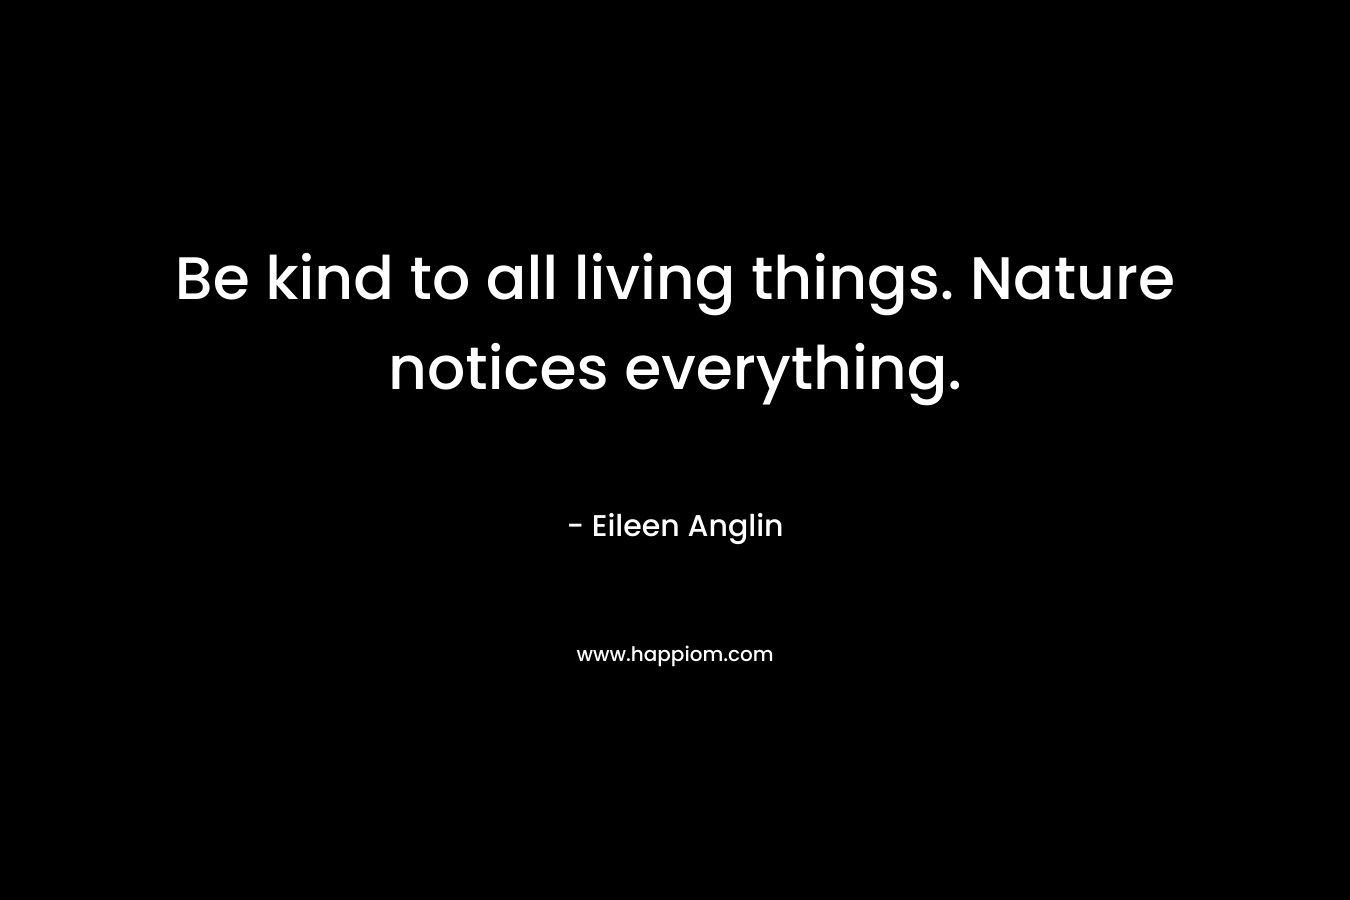 Be kind to all living things. Nature notices everything. – Eileen Anglin